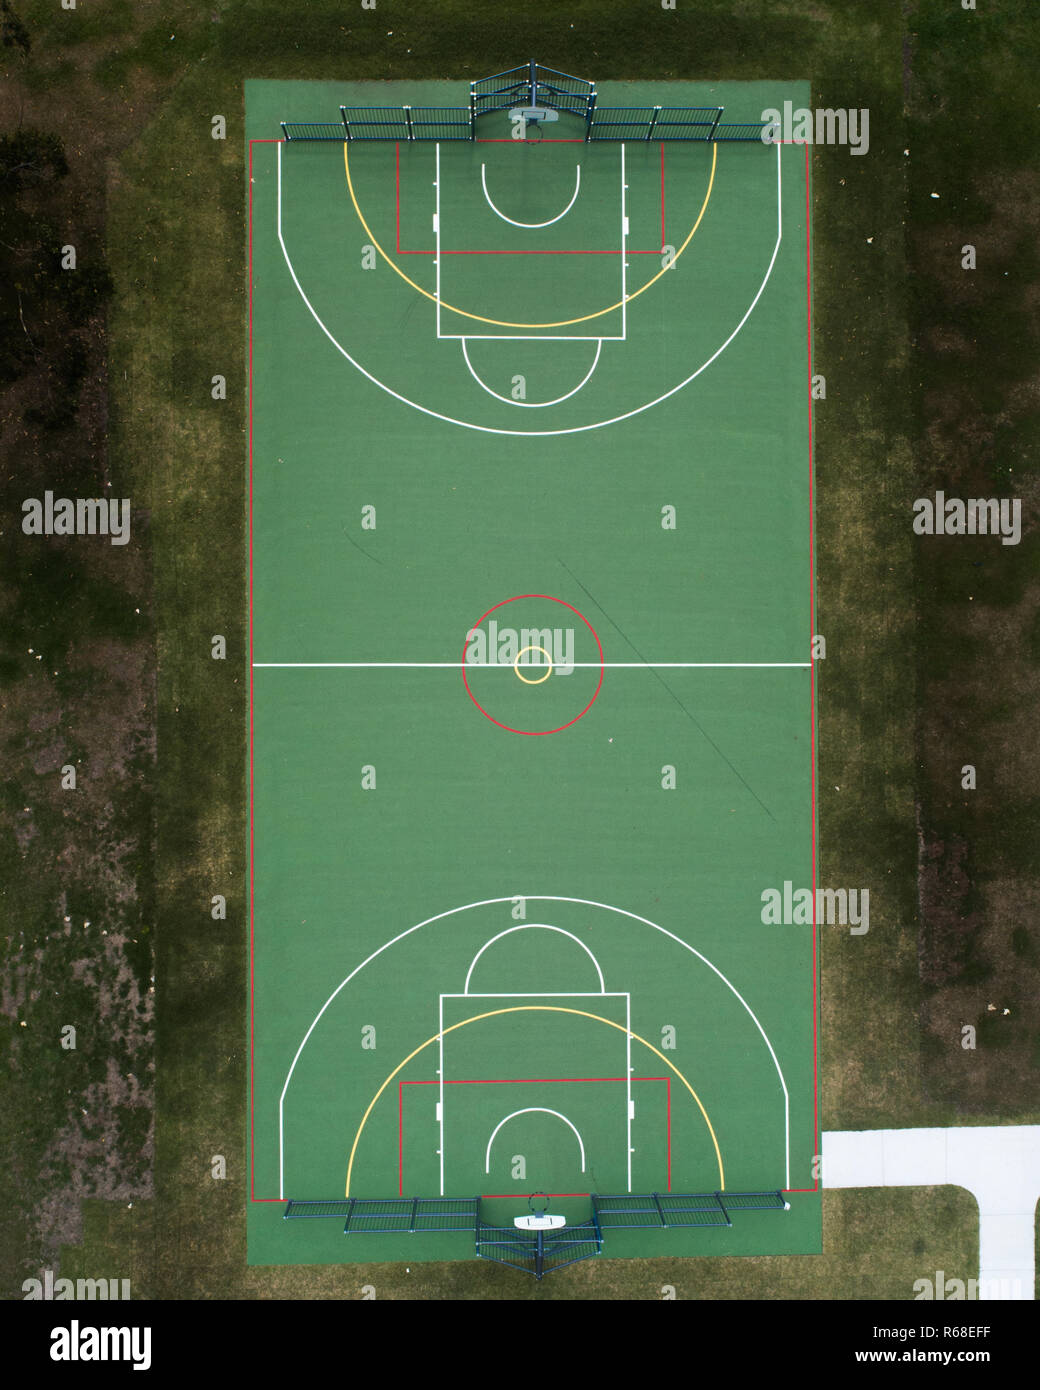 Basketball court view from above. Stock Photo